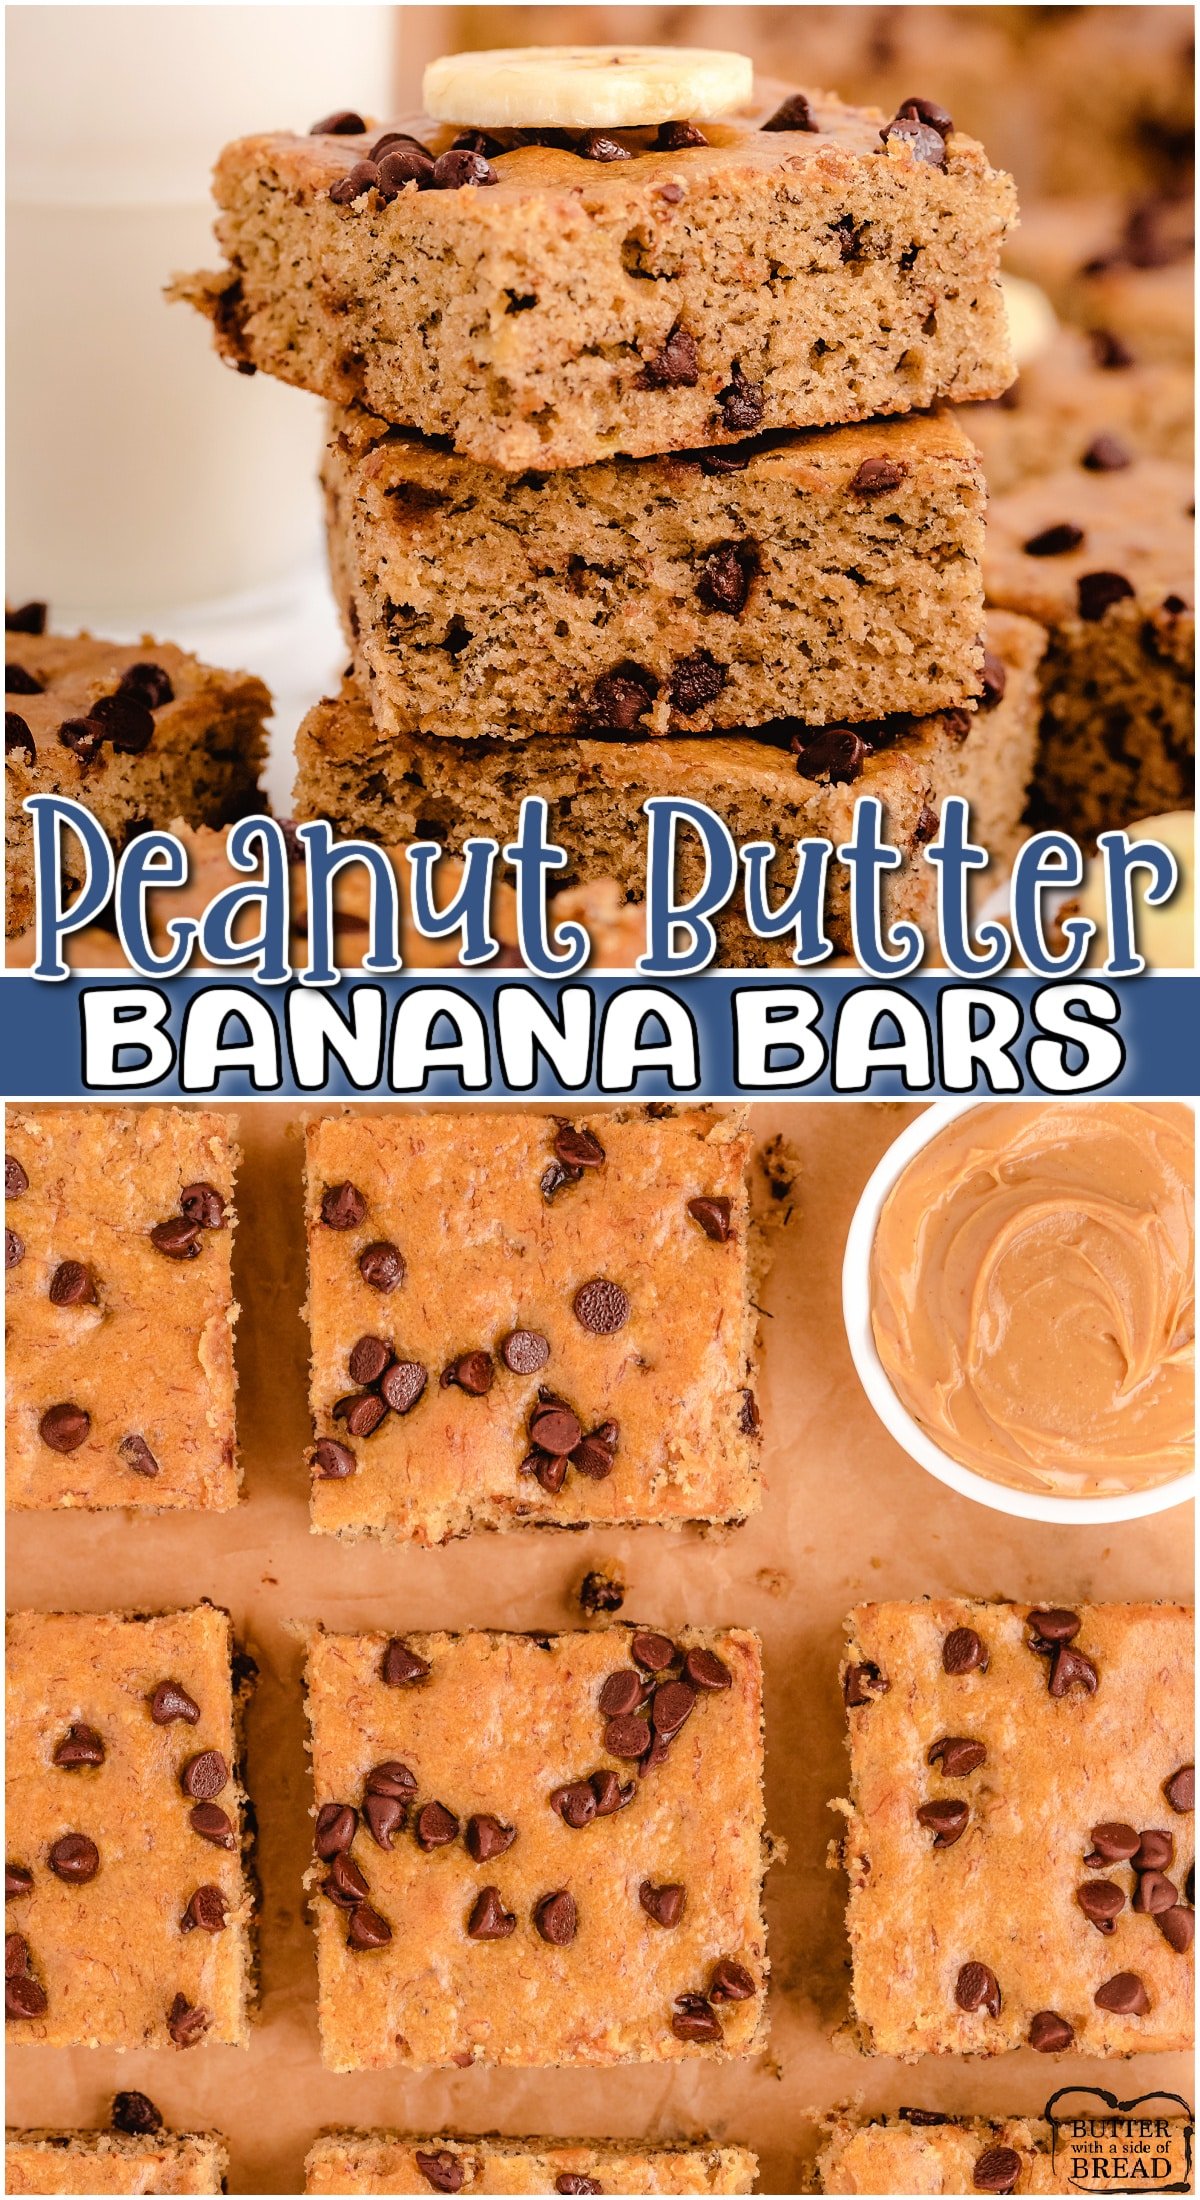 Peanut Butter Banana Bars are packed with bananas, peanut butter & chocolate chips. Banana Bars are the perfect thing to make with ripe bananas; my family goes crazy over them!